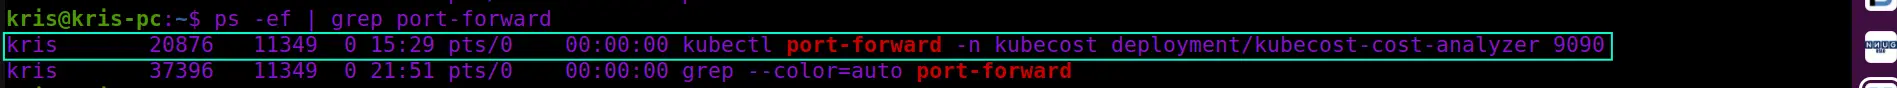 Screenshot of the ps command output that lists currently active processes that contain port-forward keyword